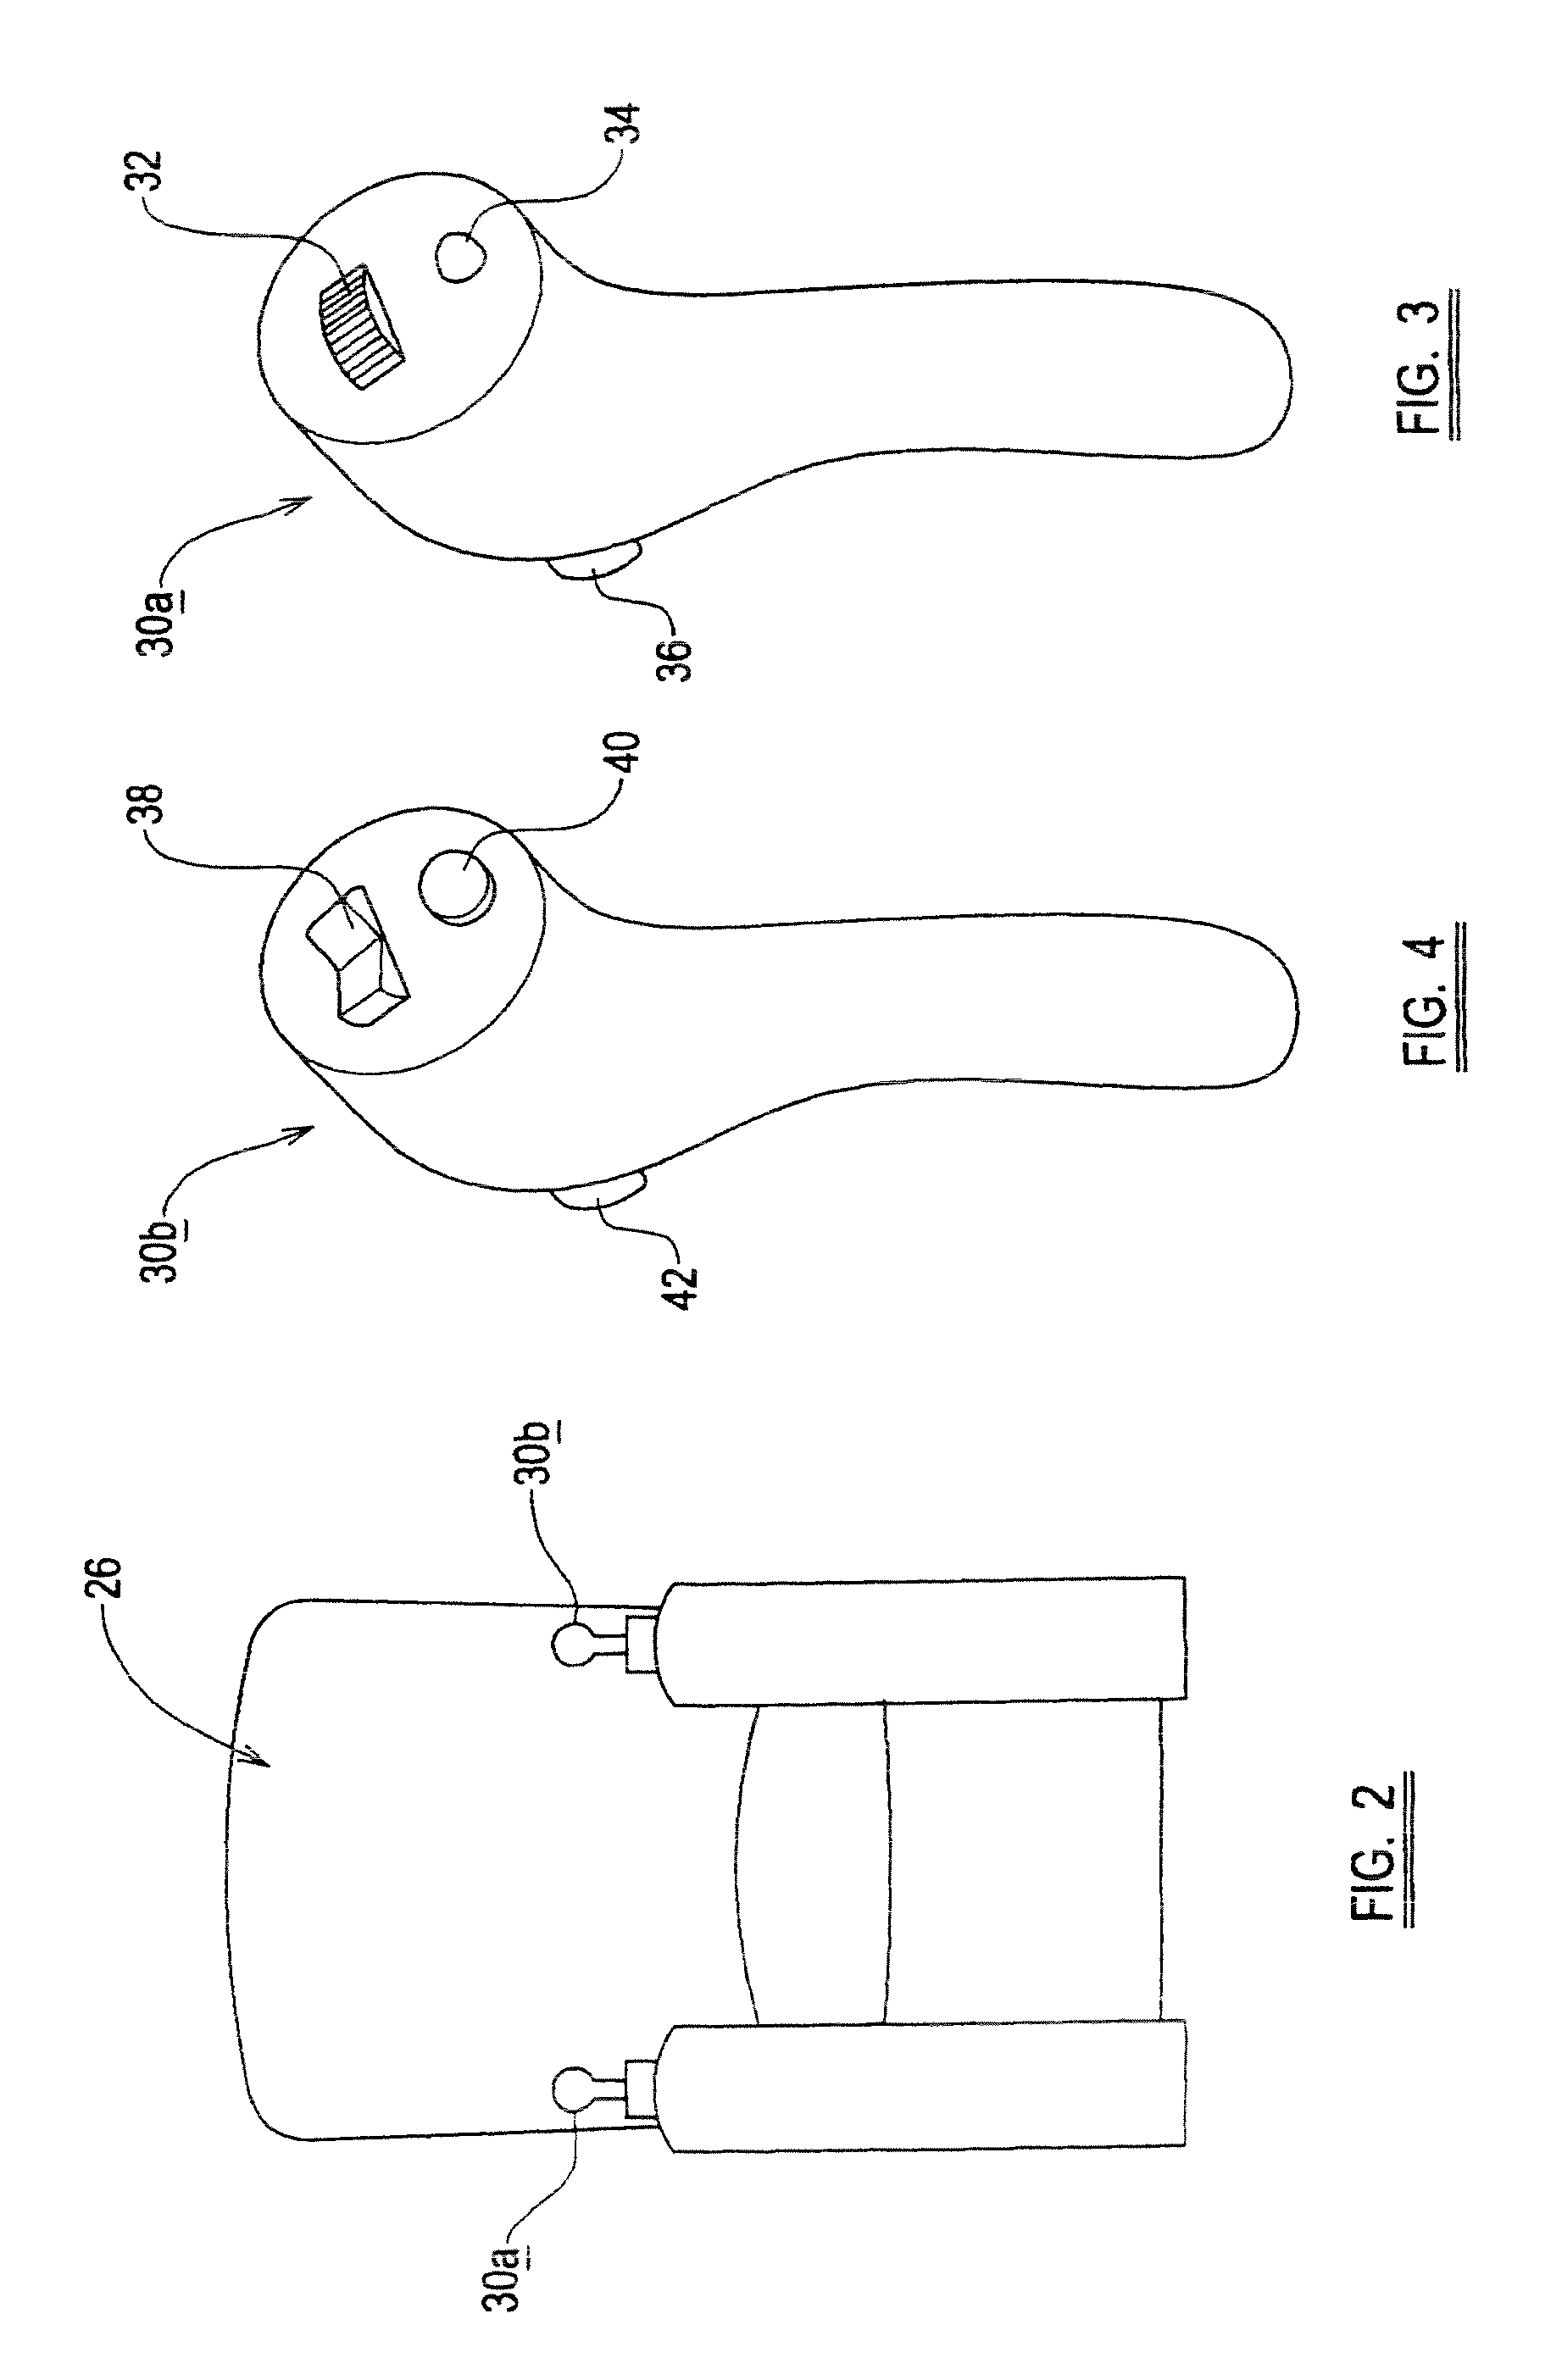 Method of controlling a working machine